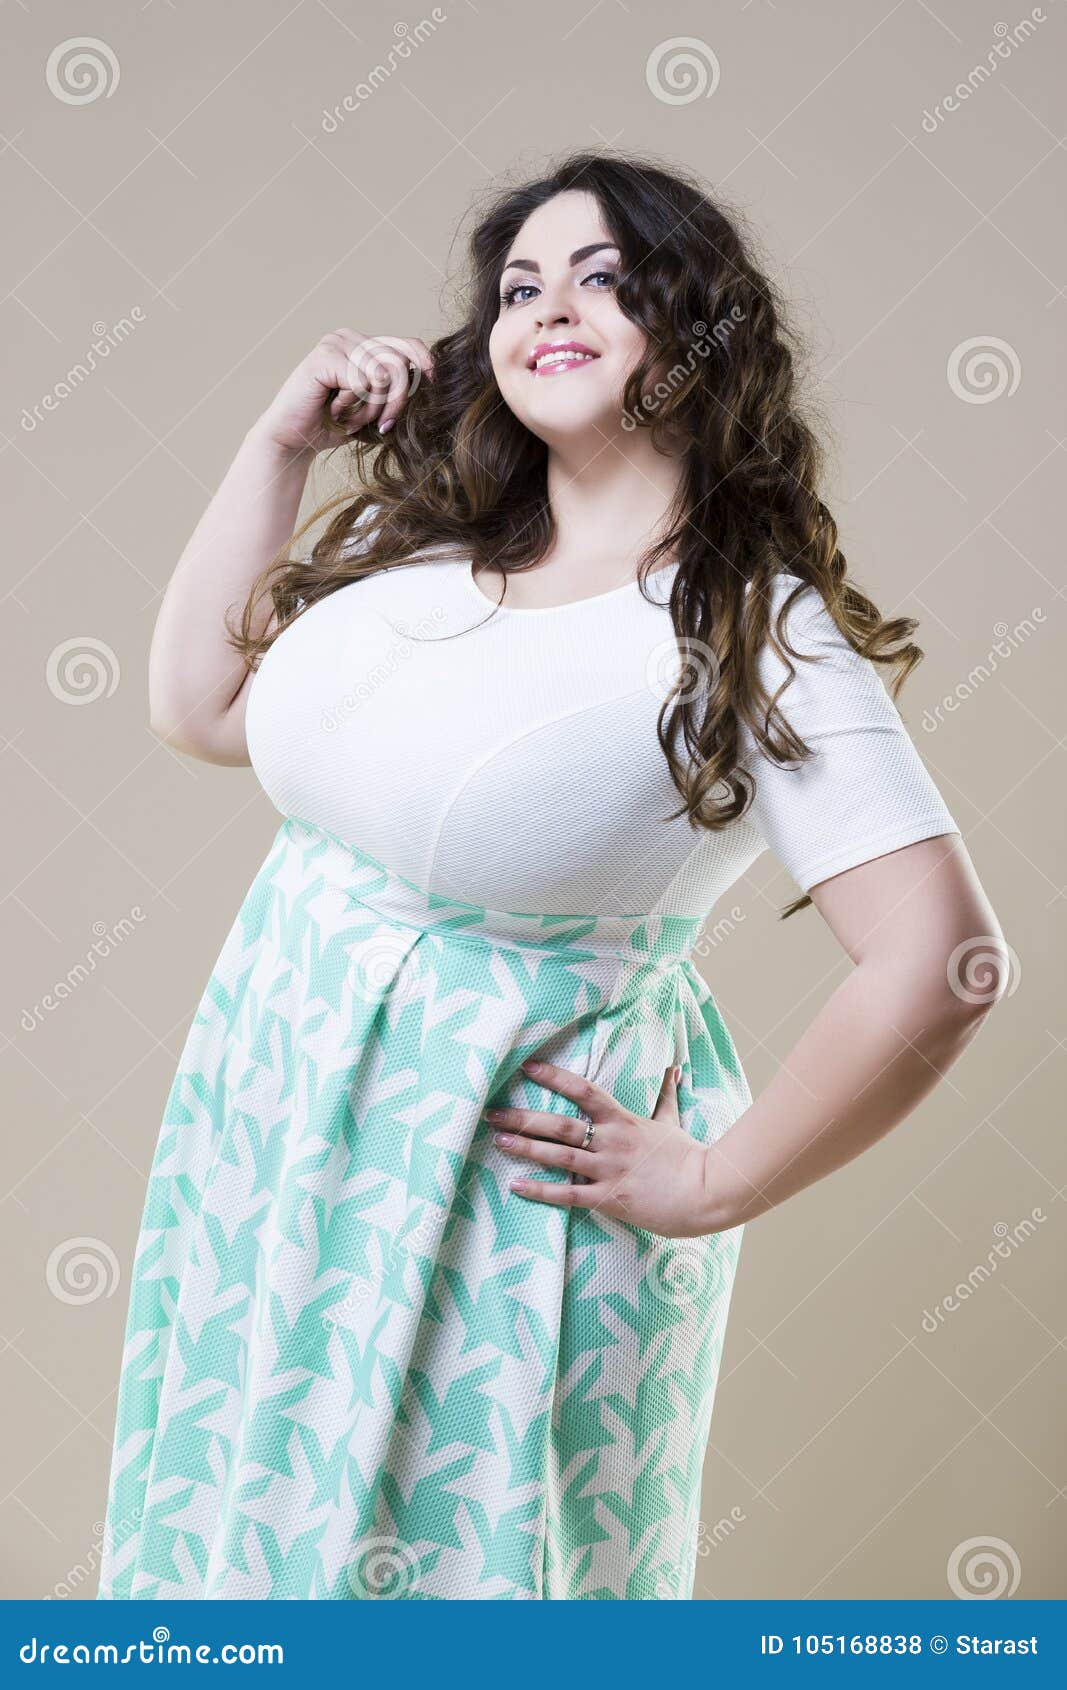 is a bbw What size